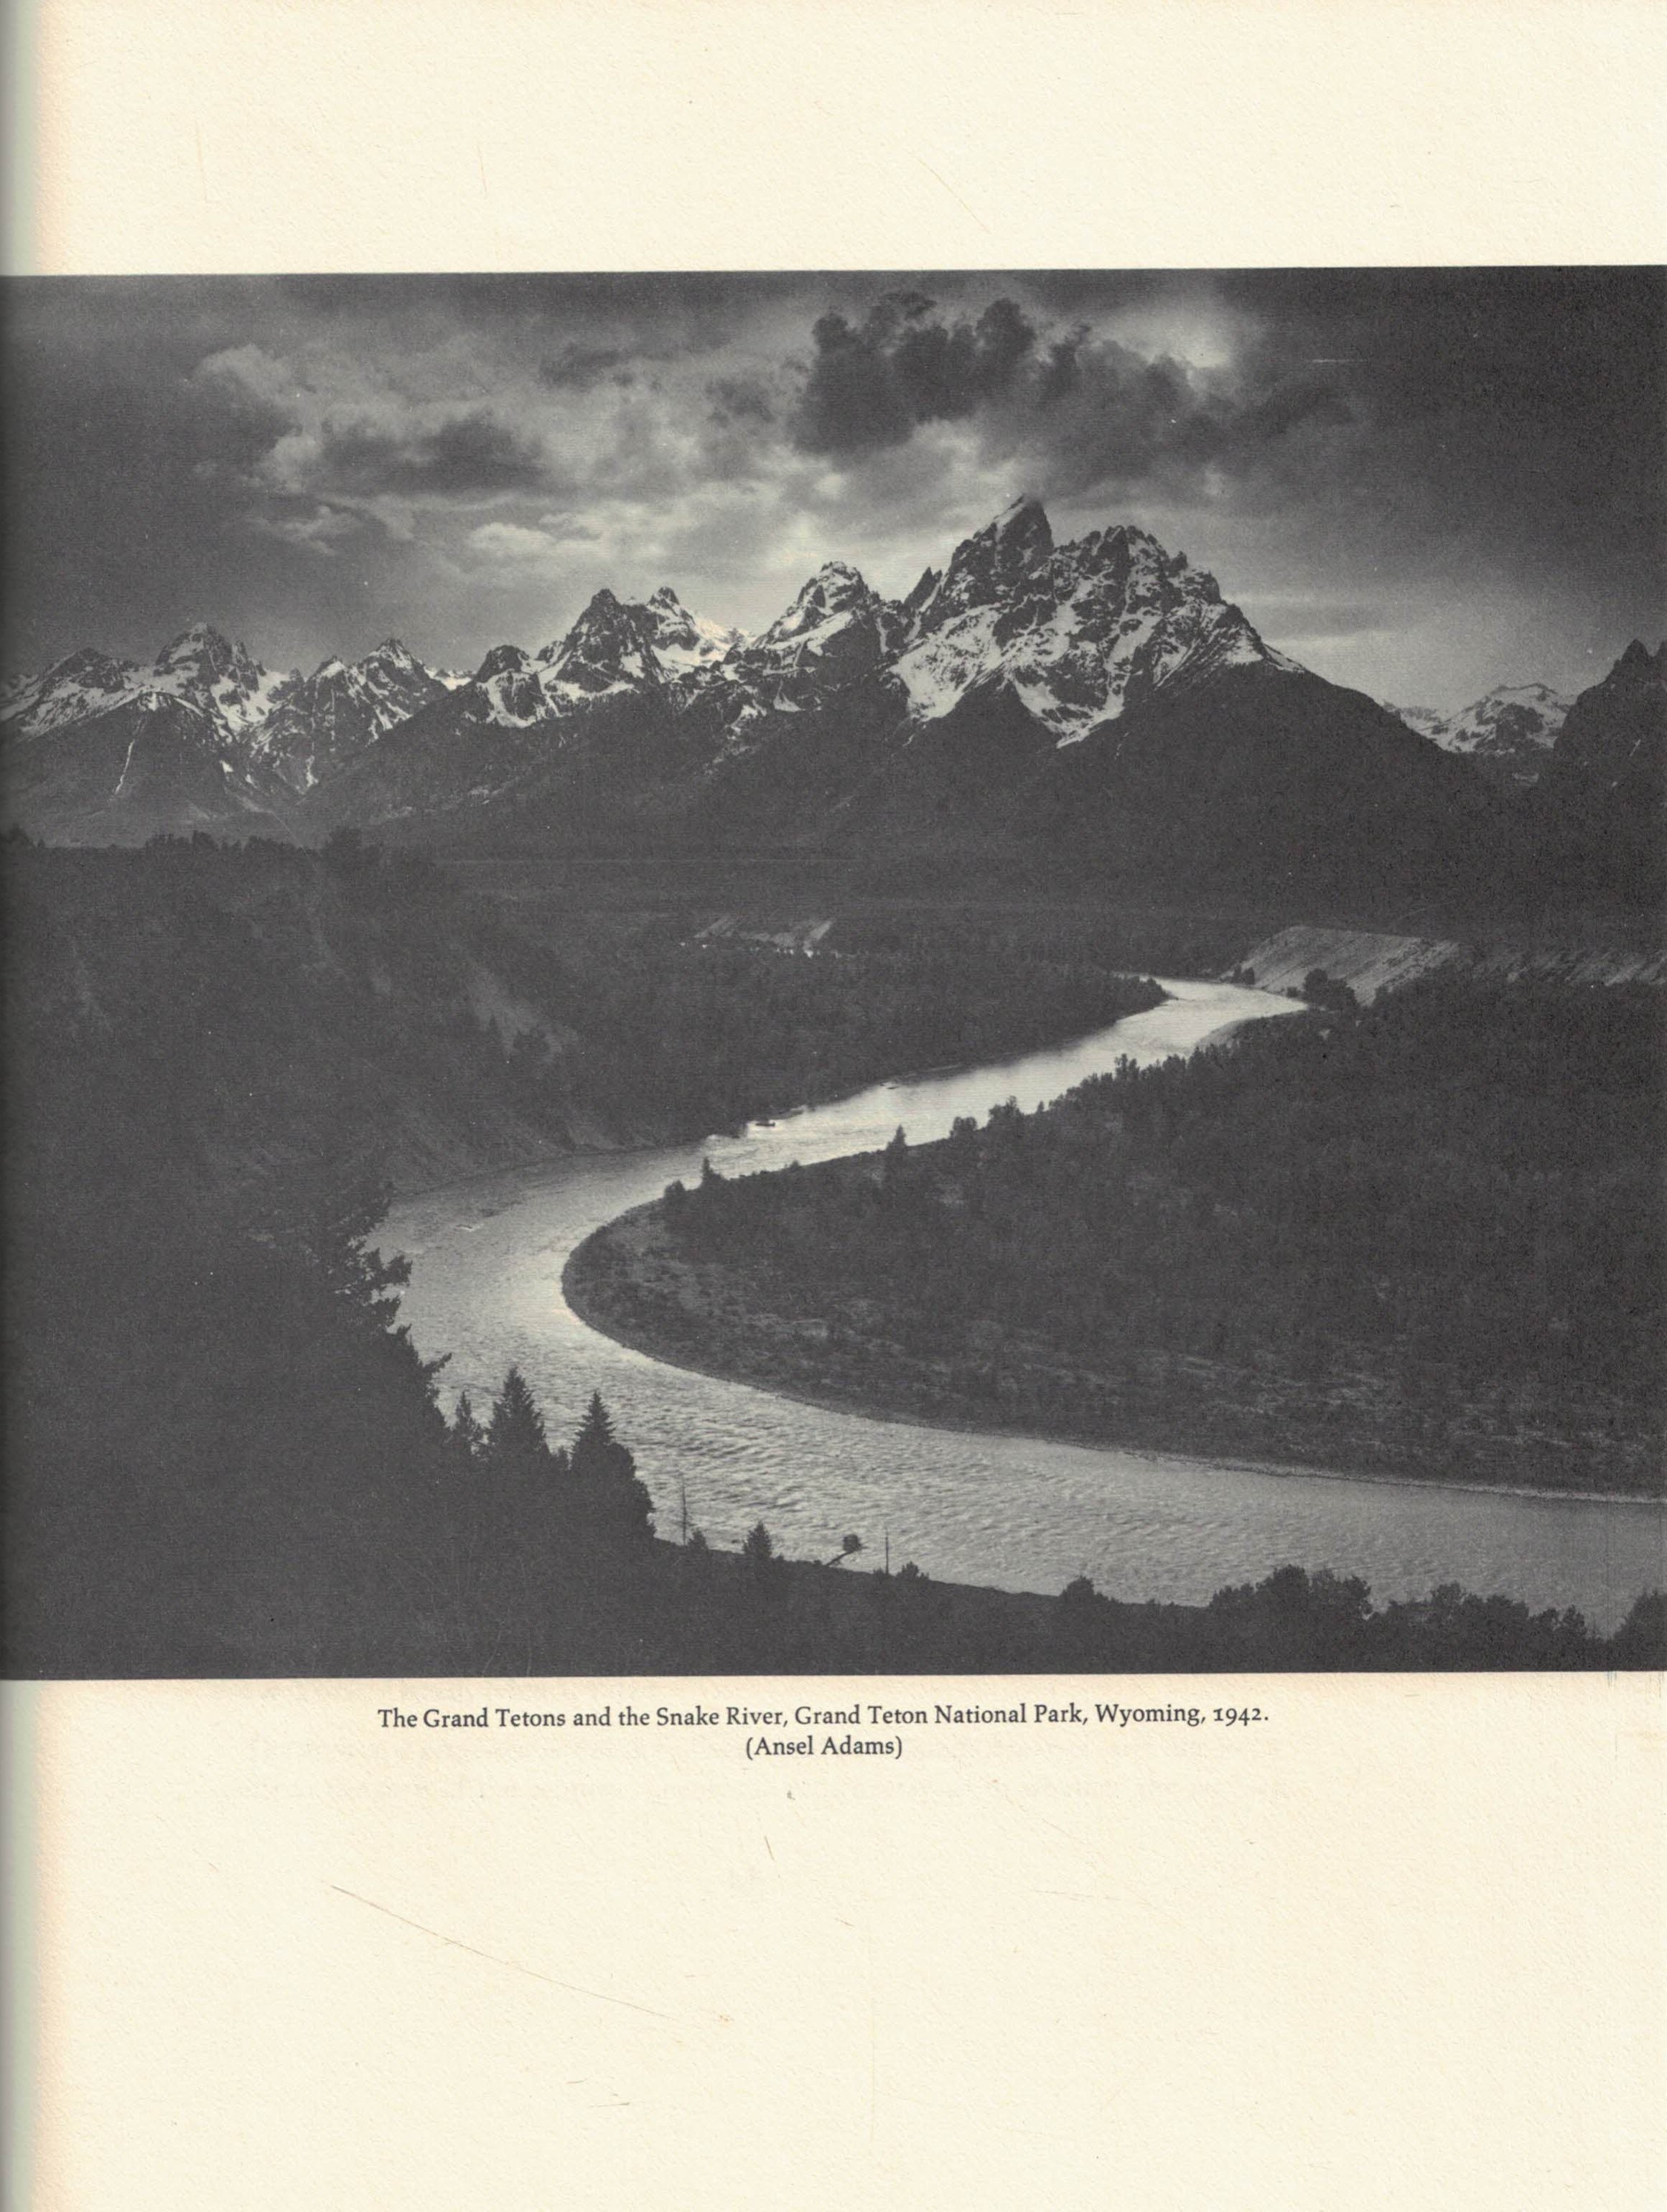 Classics in the Literature of Mountaineering and Mountain Travel from the Francis P Farquhar Collection of Mountaineering Literature. An Annotated Bibliography. Limited edition.